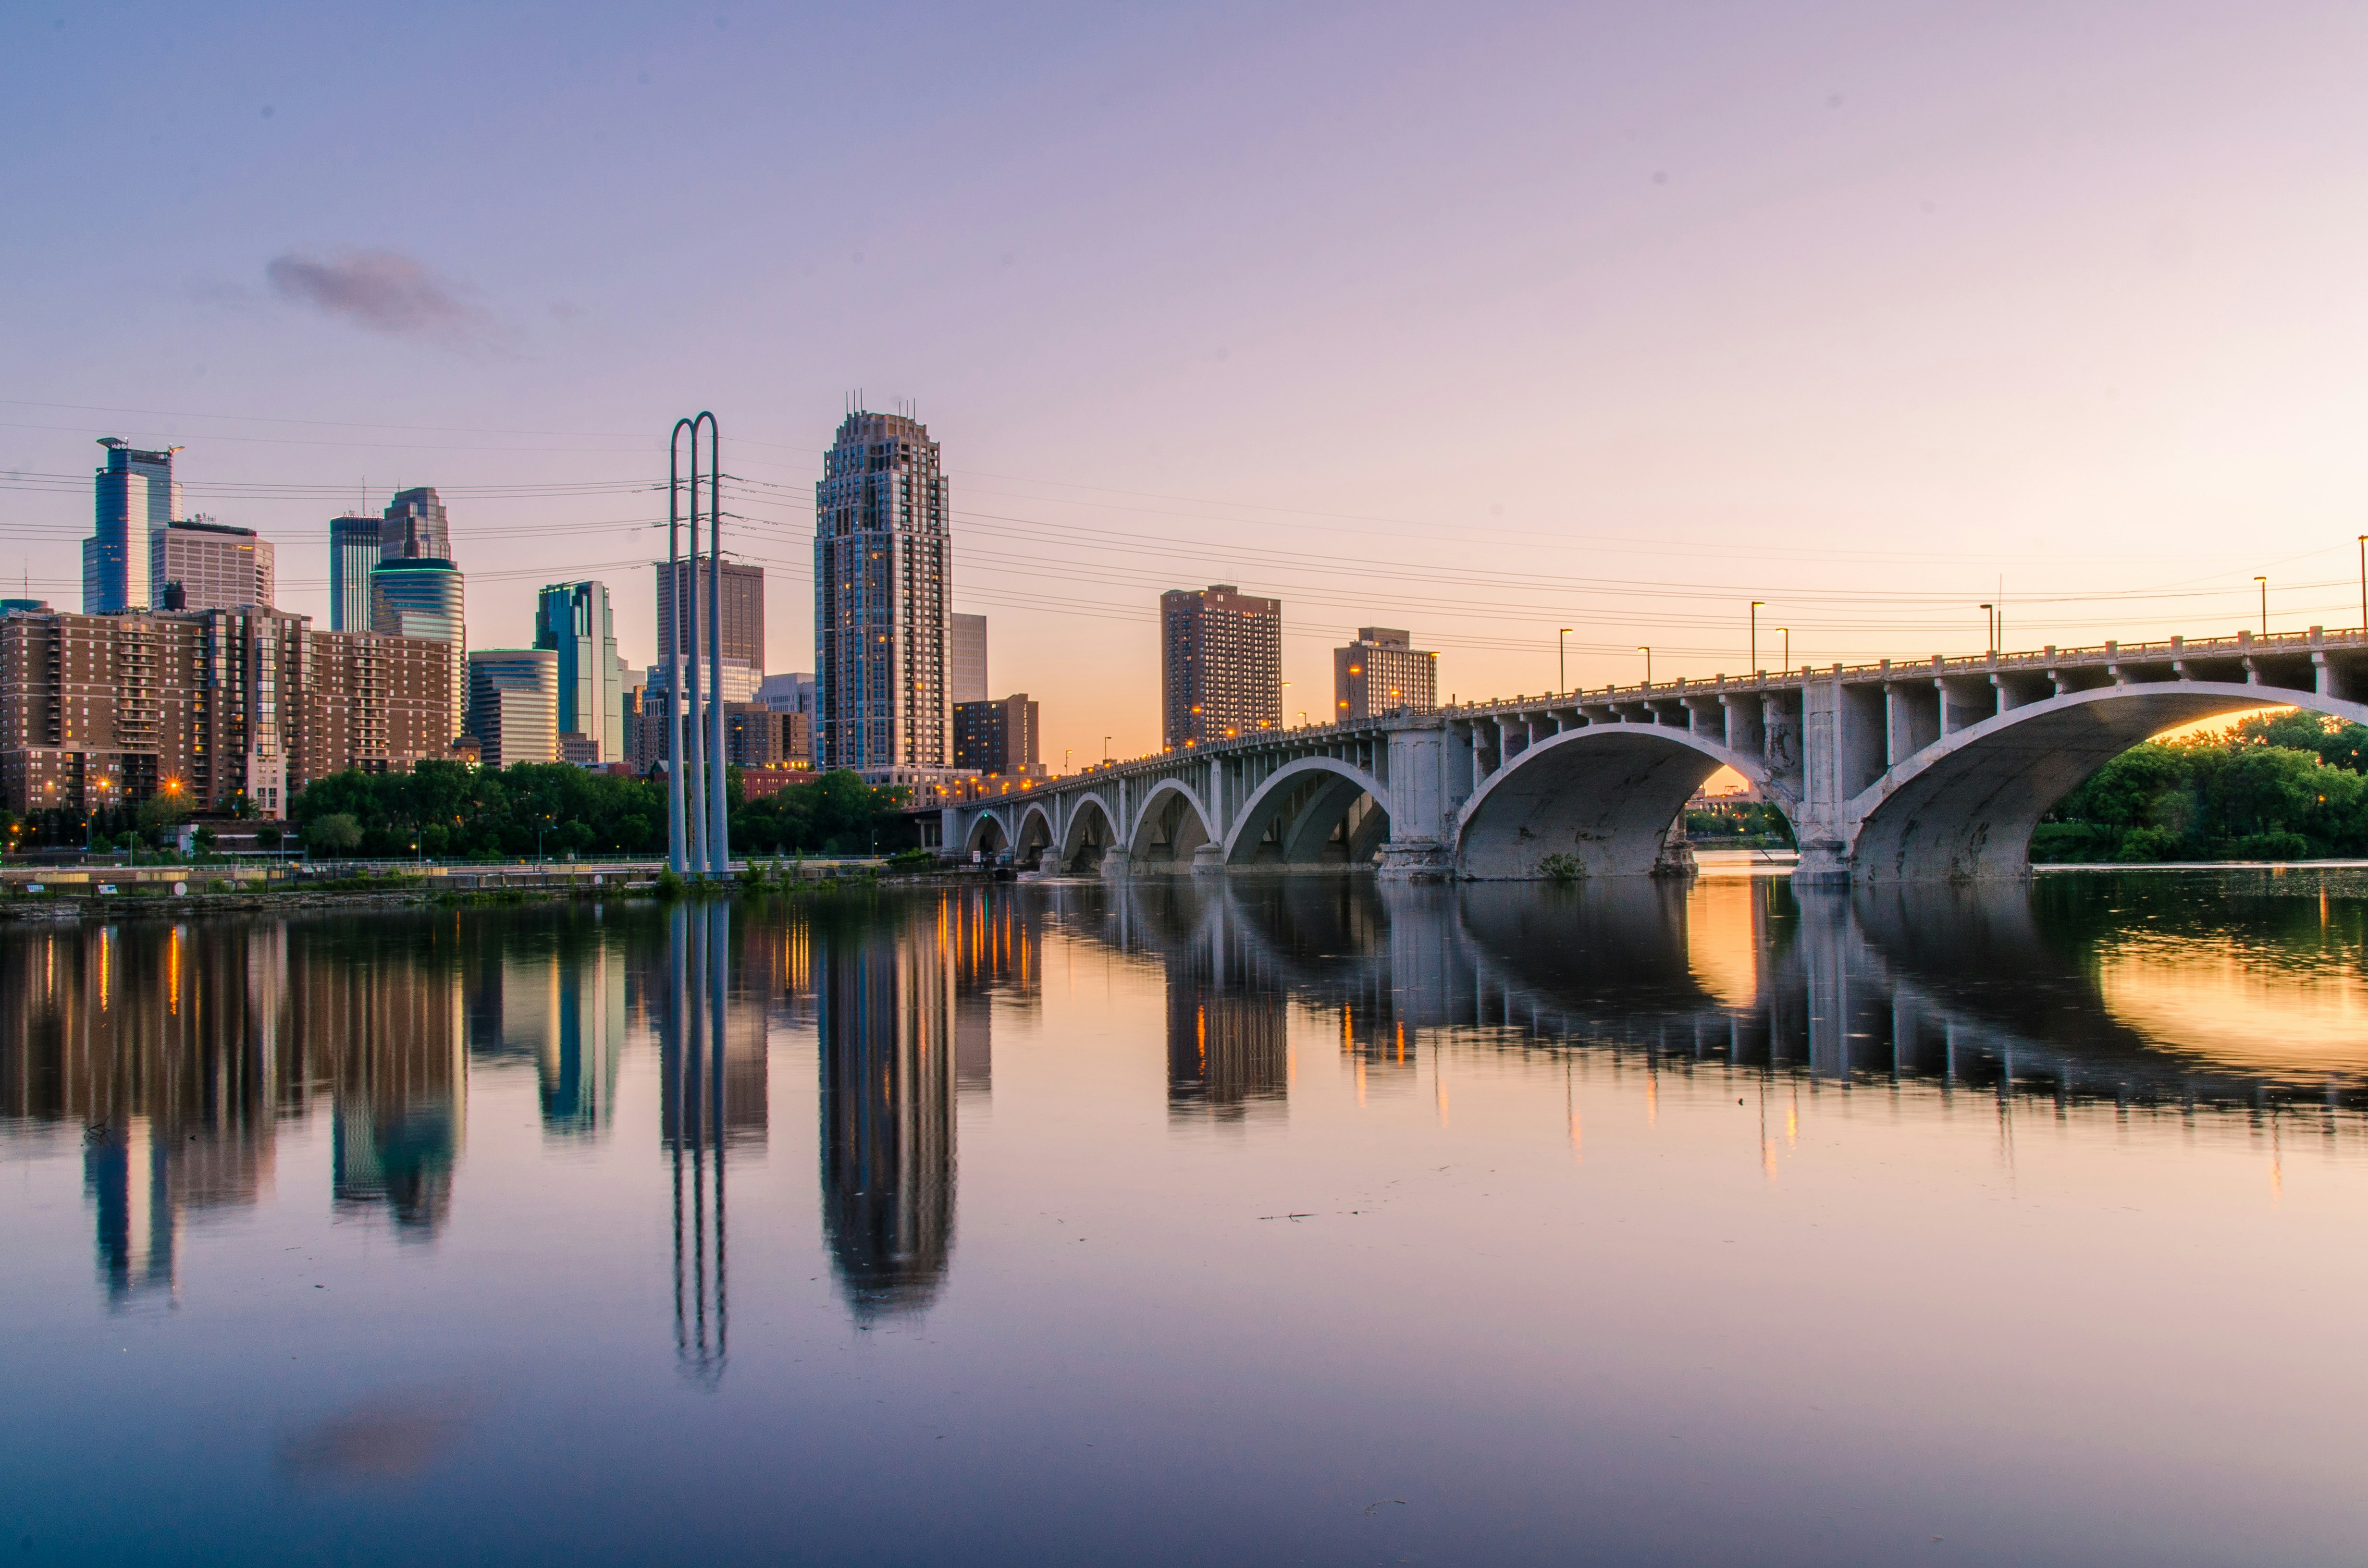 A bridge over calm waters reflecting the Minneapolis skyline